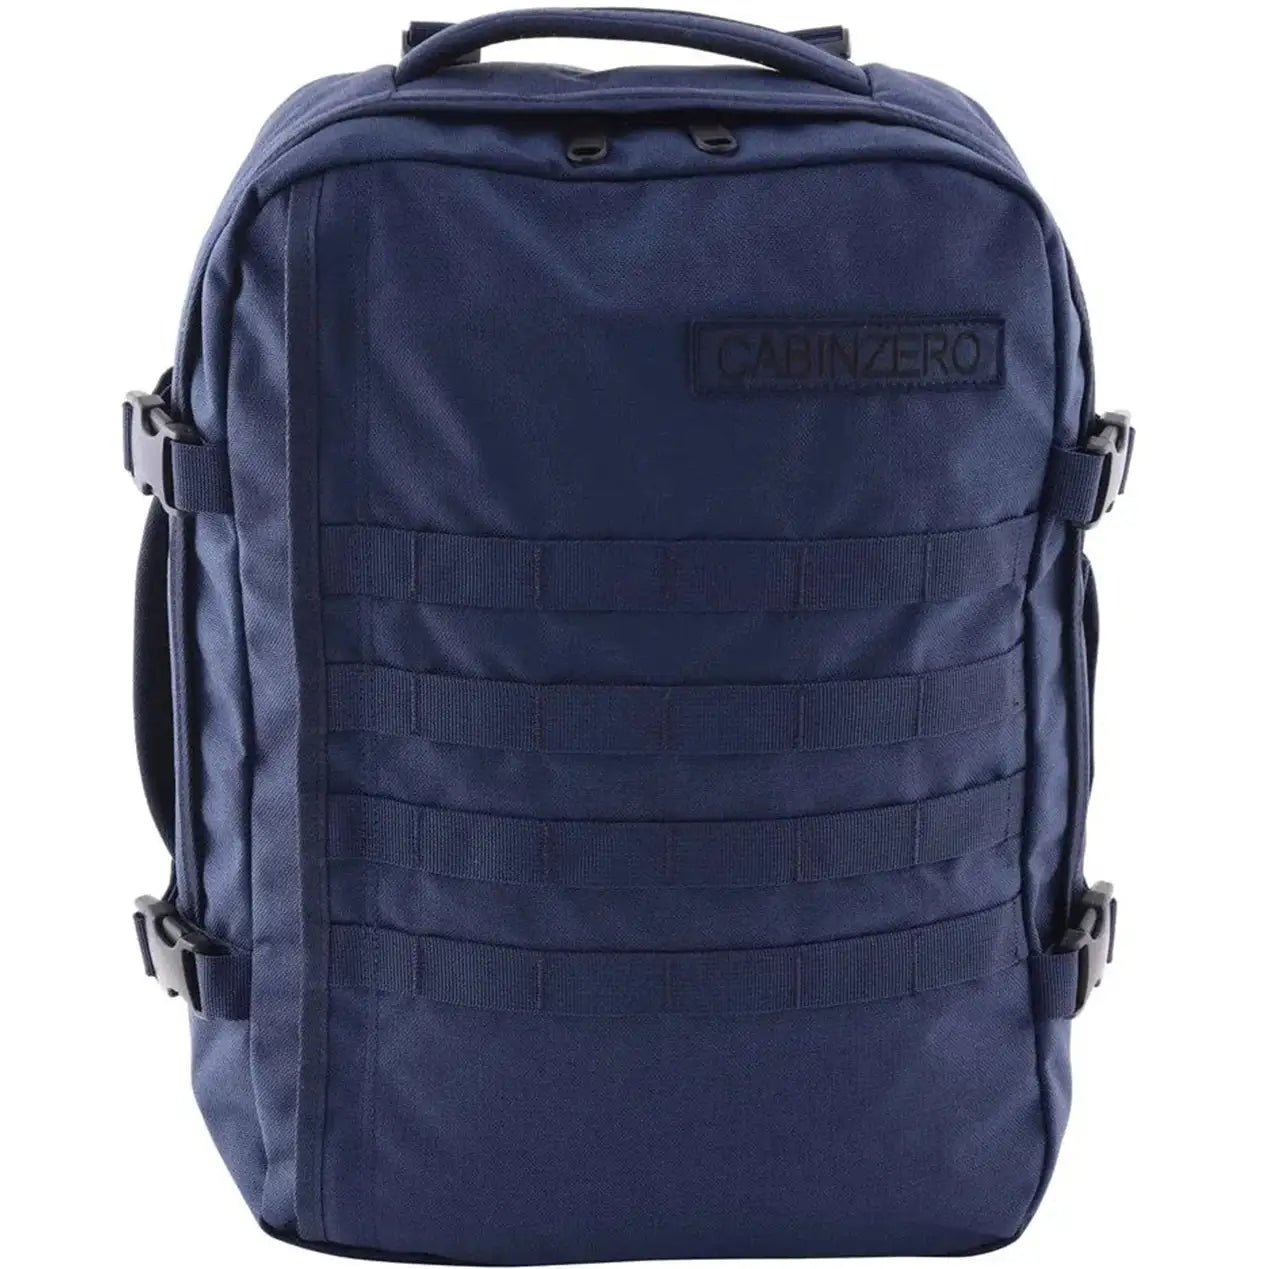 CabinZero Military 28L Cabin Backpack 42 cm - Navy